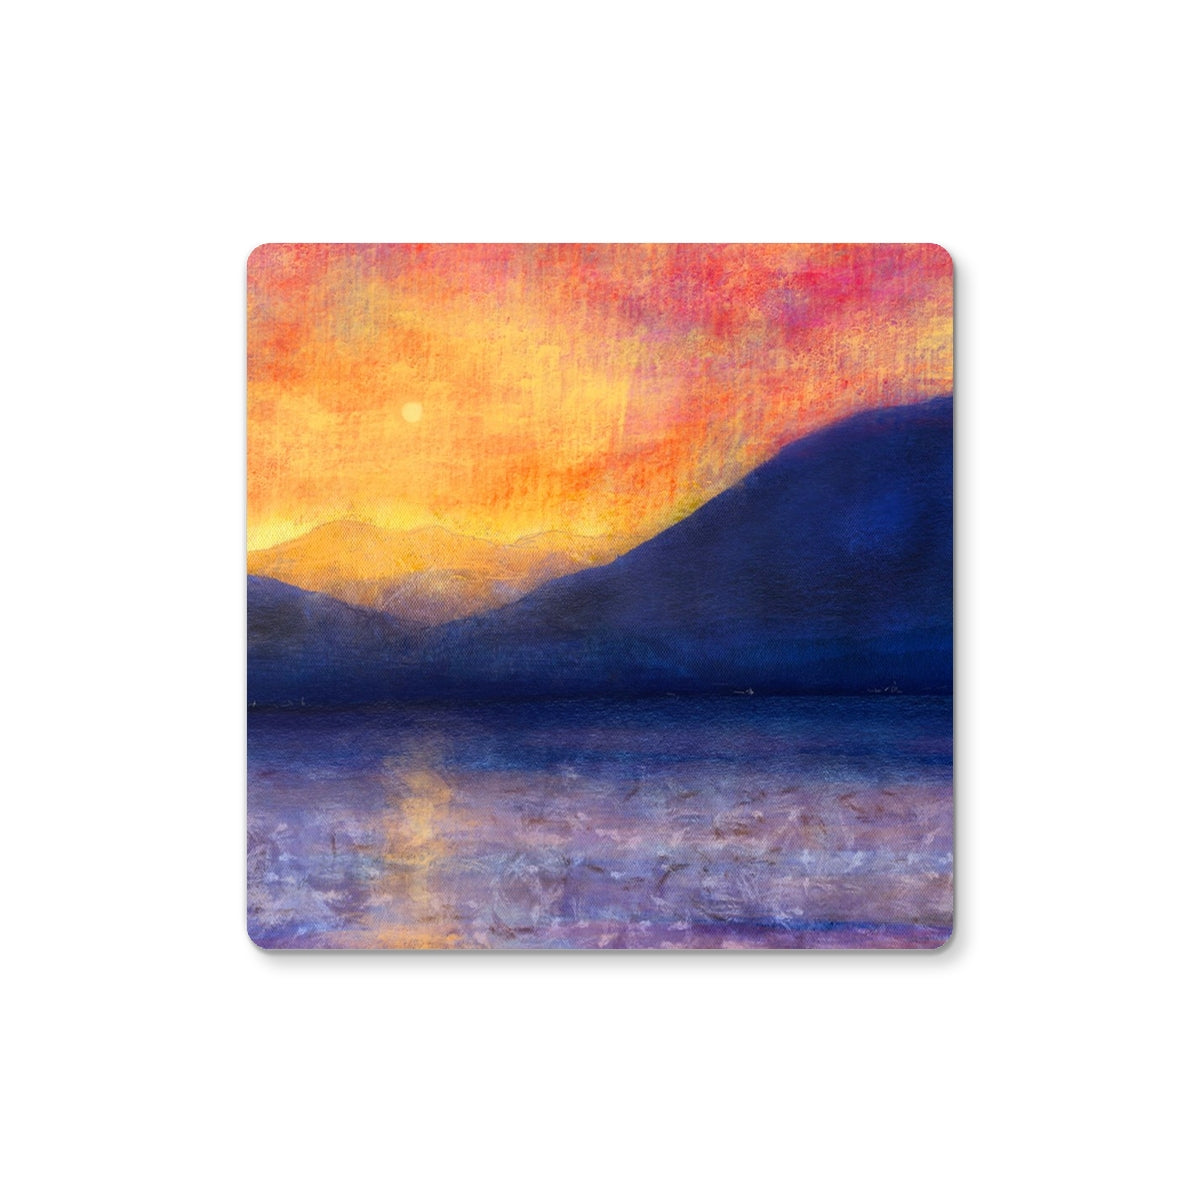 Sunset Approaching Mull Art Gifts Coaster-Coasters-Hebridean Islands Art Gallery-6 Coasters-Paintings, Prints, Homeware, Art Gifts From Scotland By Scottish Artist Kevin Hunter